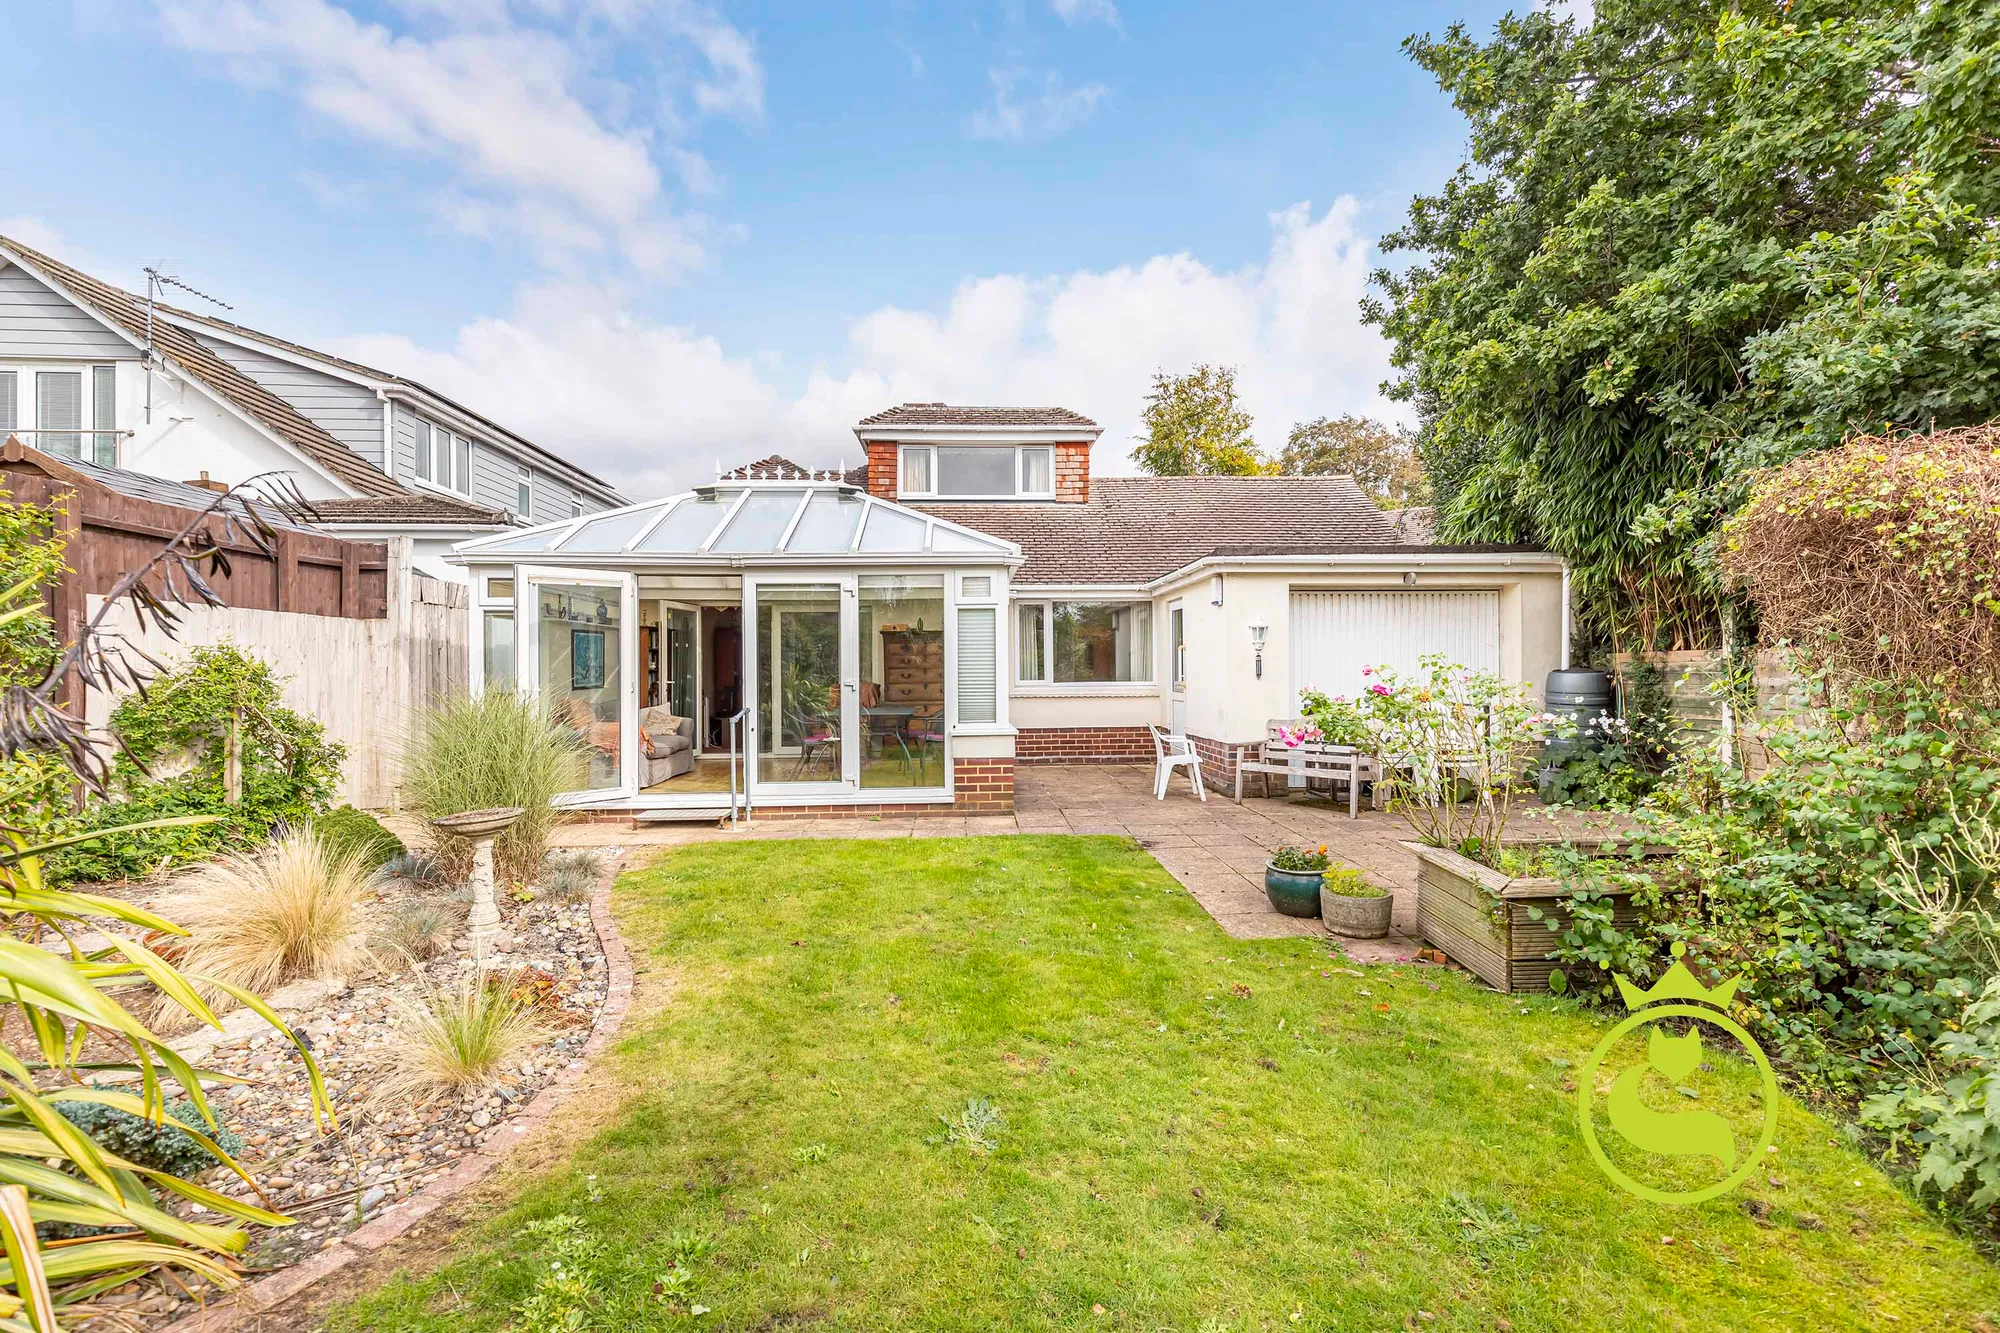 4 bed bungalow for sale in Springfield Crescent, Poole - Property Image 1